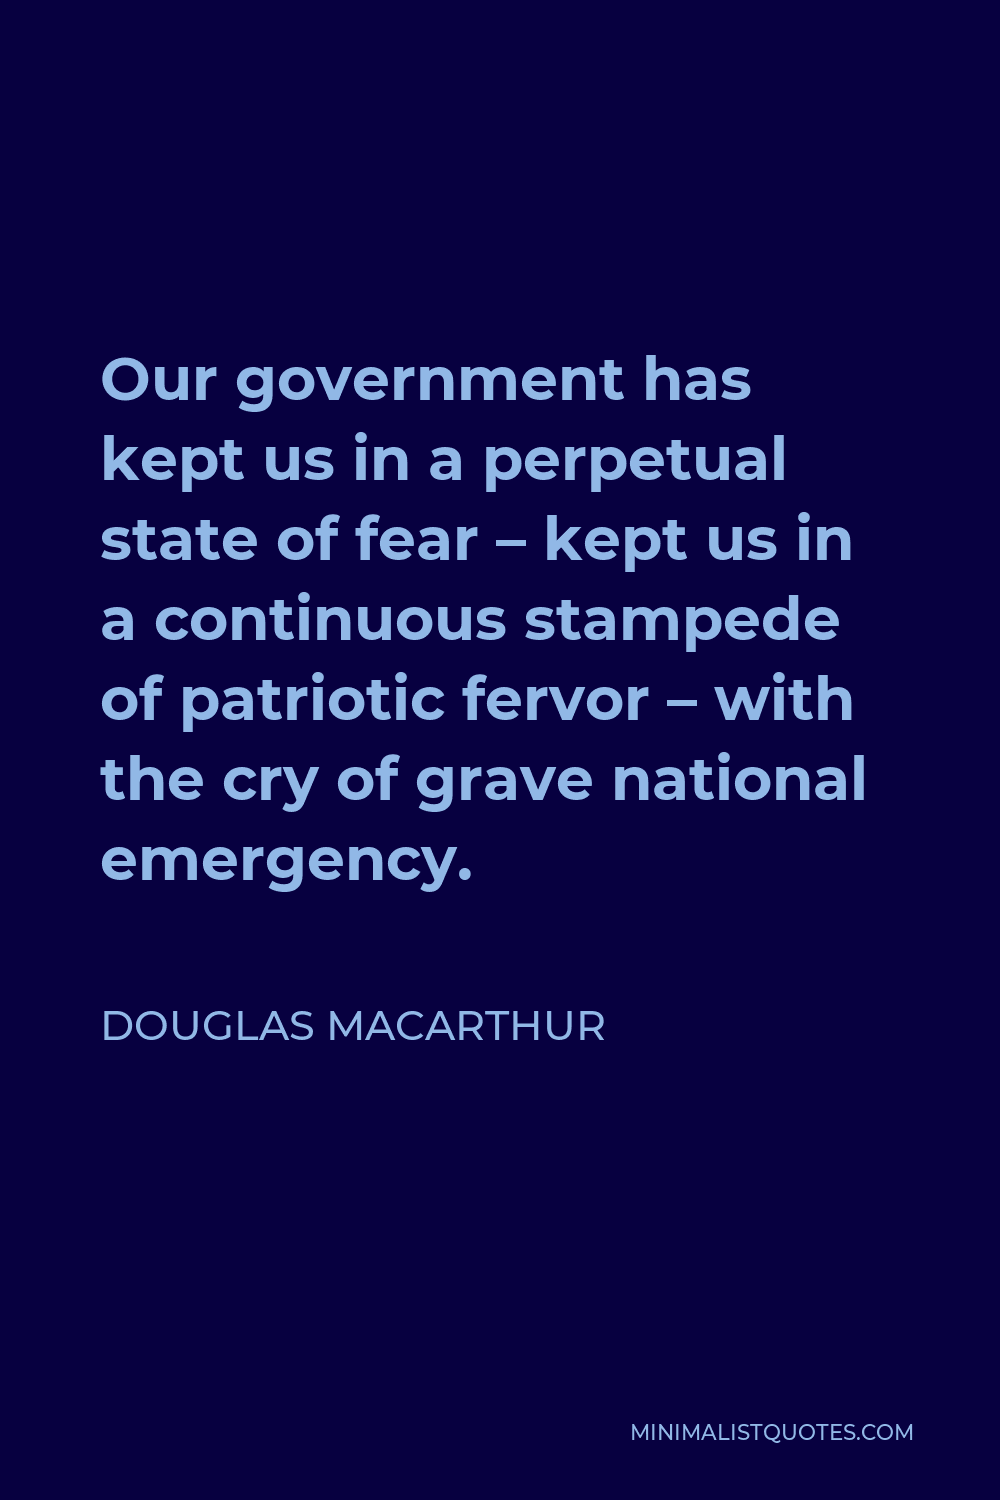 Douglas MacArthur Quote - Our government has kept us in a perpetual state of fear – kept us in a continuous stampede of patriotic fervor – with the cry of grave national emergency.